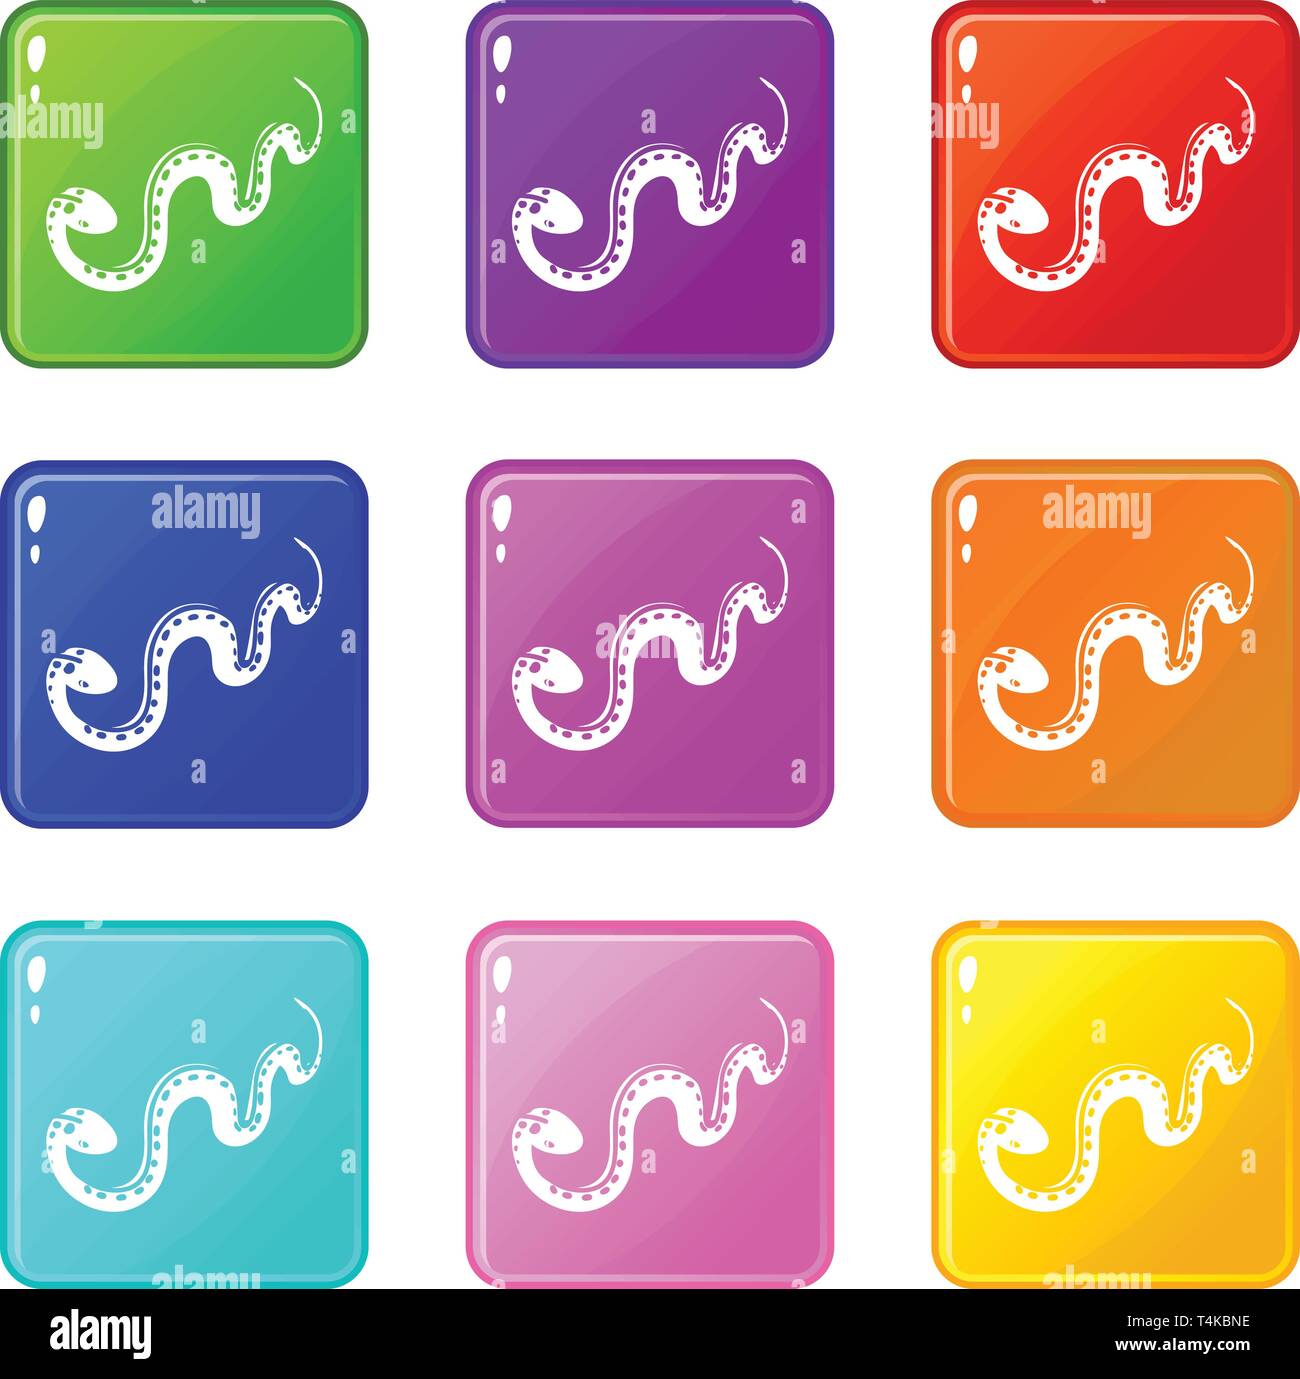 Desert snake icons set 9 color collection Stock Vector